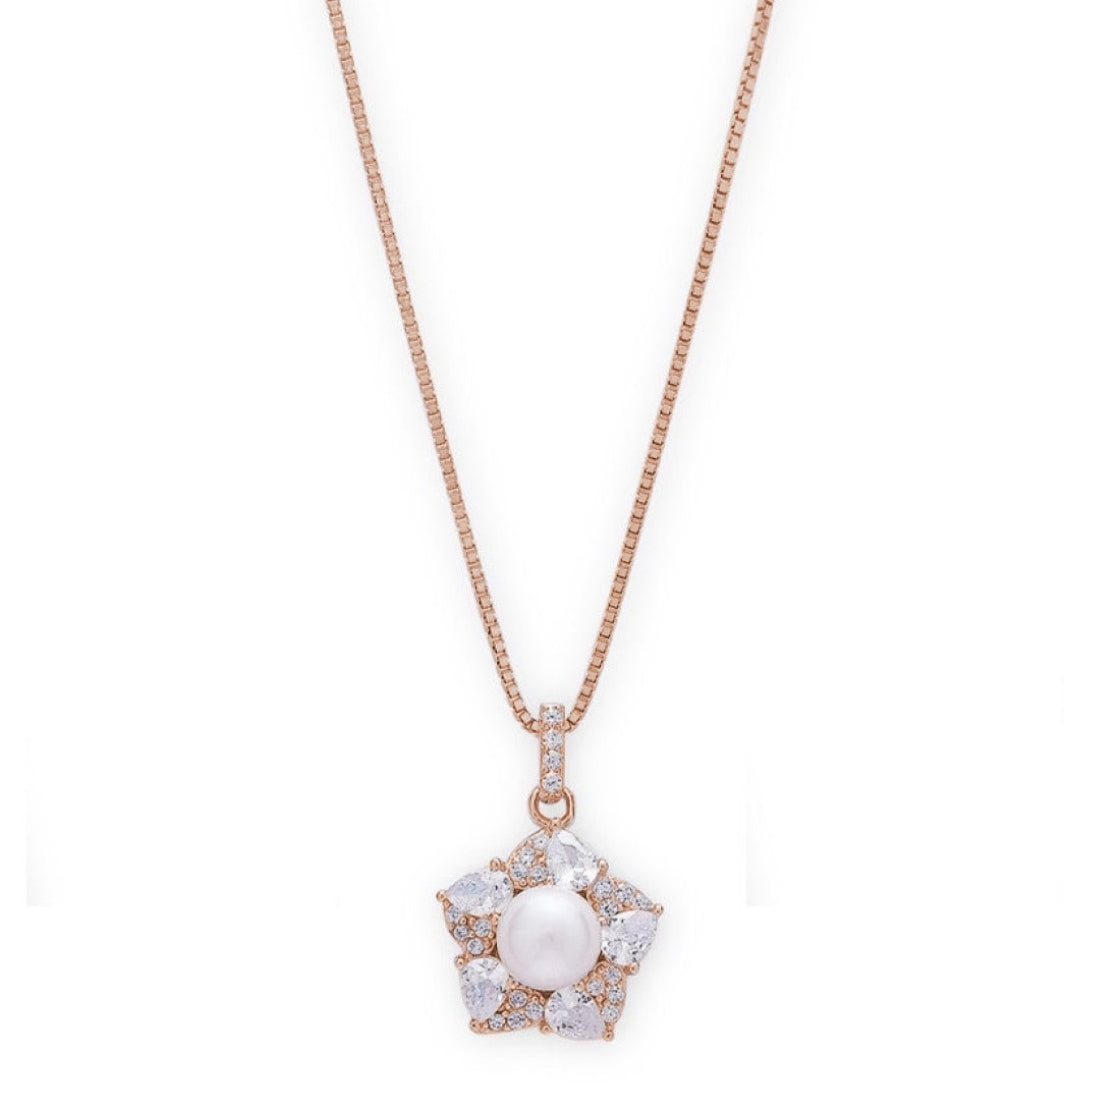 Blooming Beauty 925 Sterling Silver Rose Gold-Plated Flower Pendant